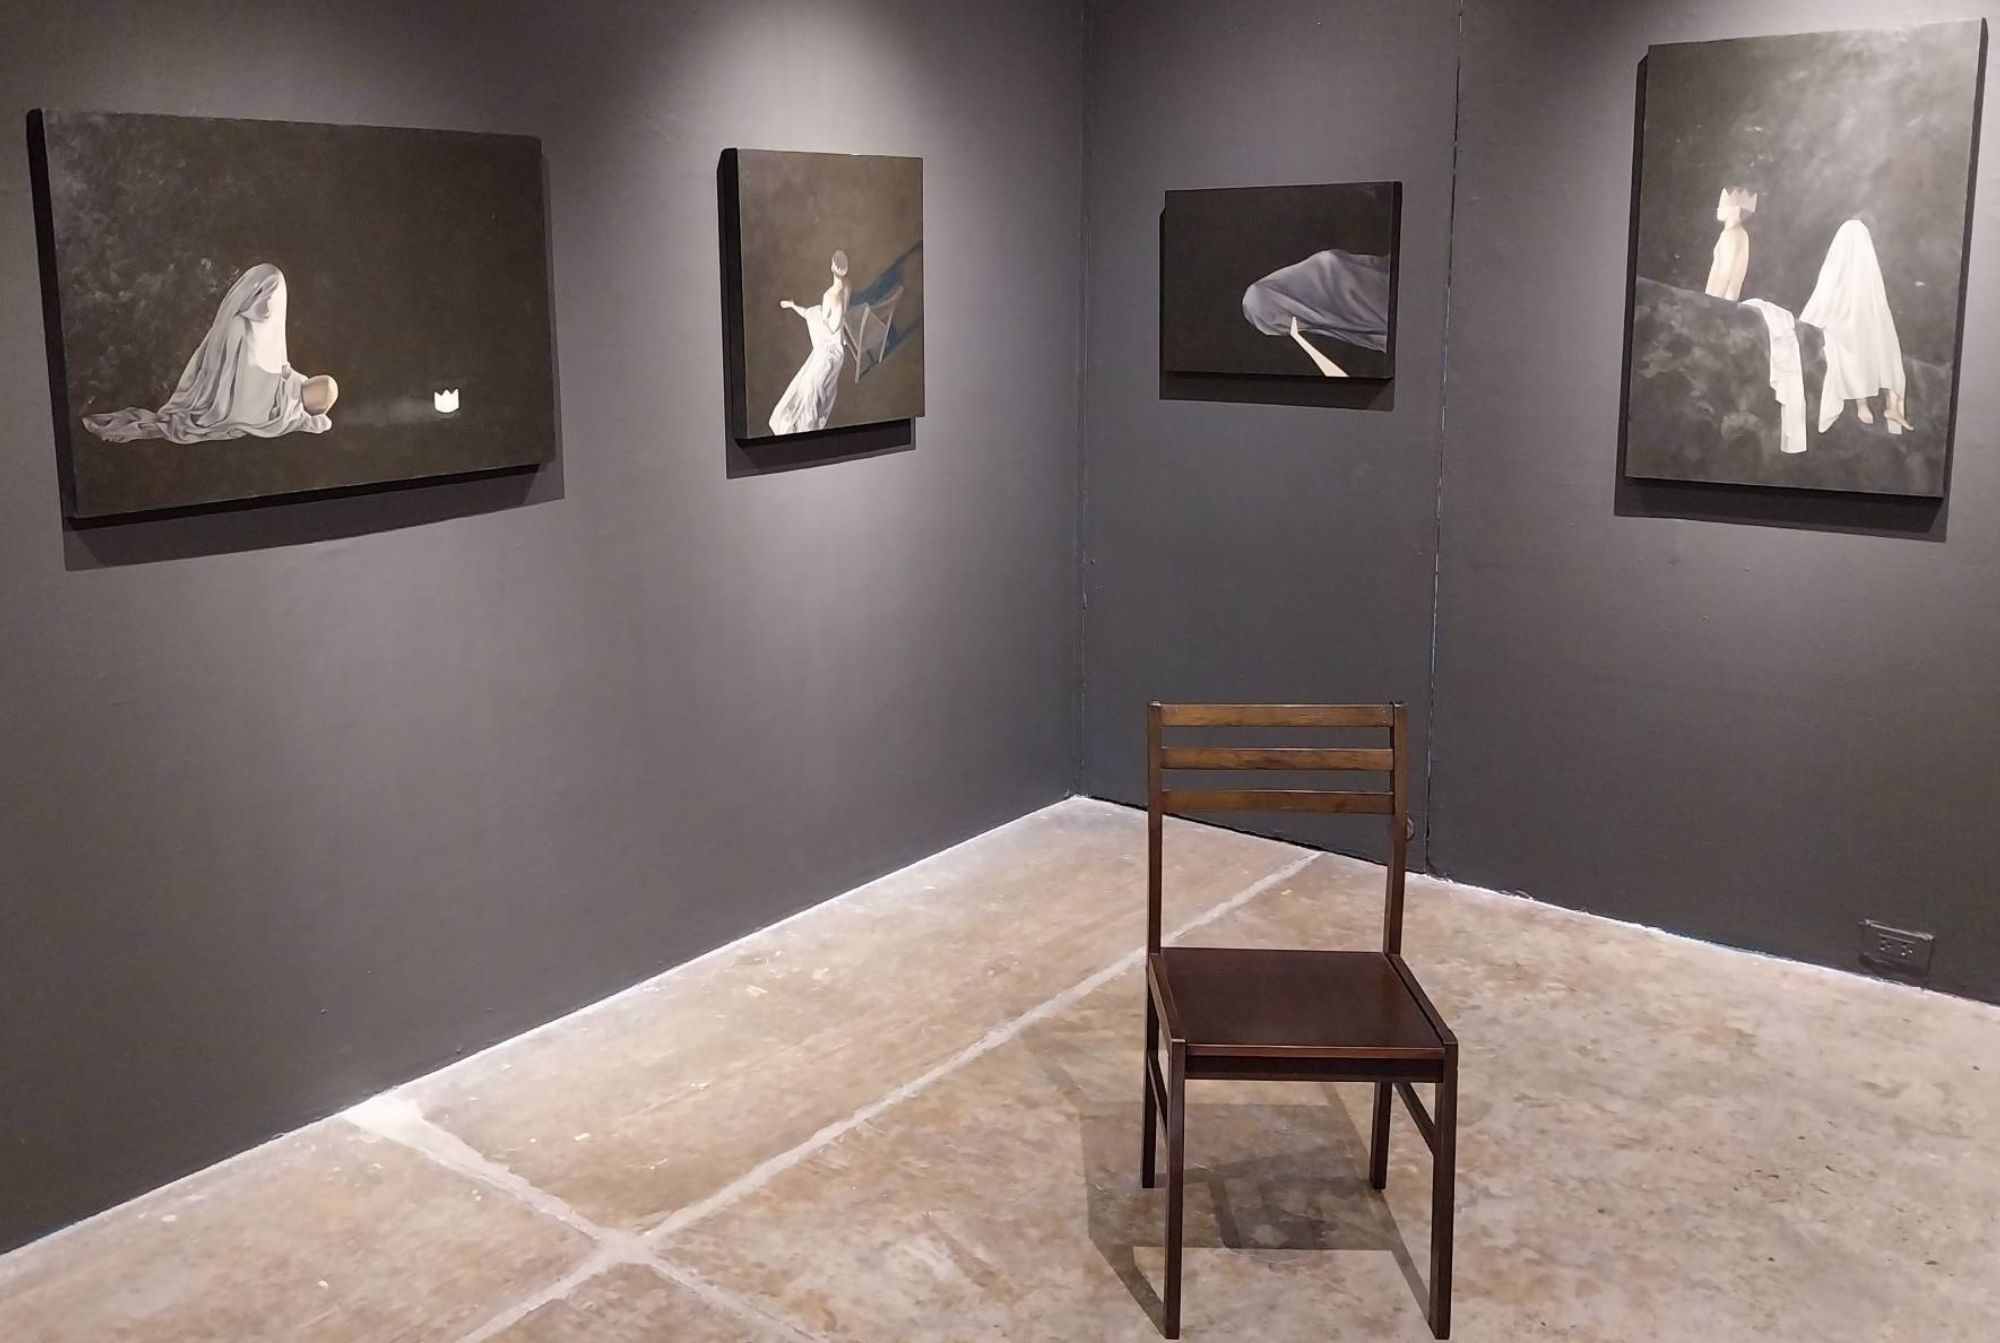 Some of the paintings for Gelo Montiero's new exhibit, with a wooden chair in the center. Photo by Elle Yap.